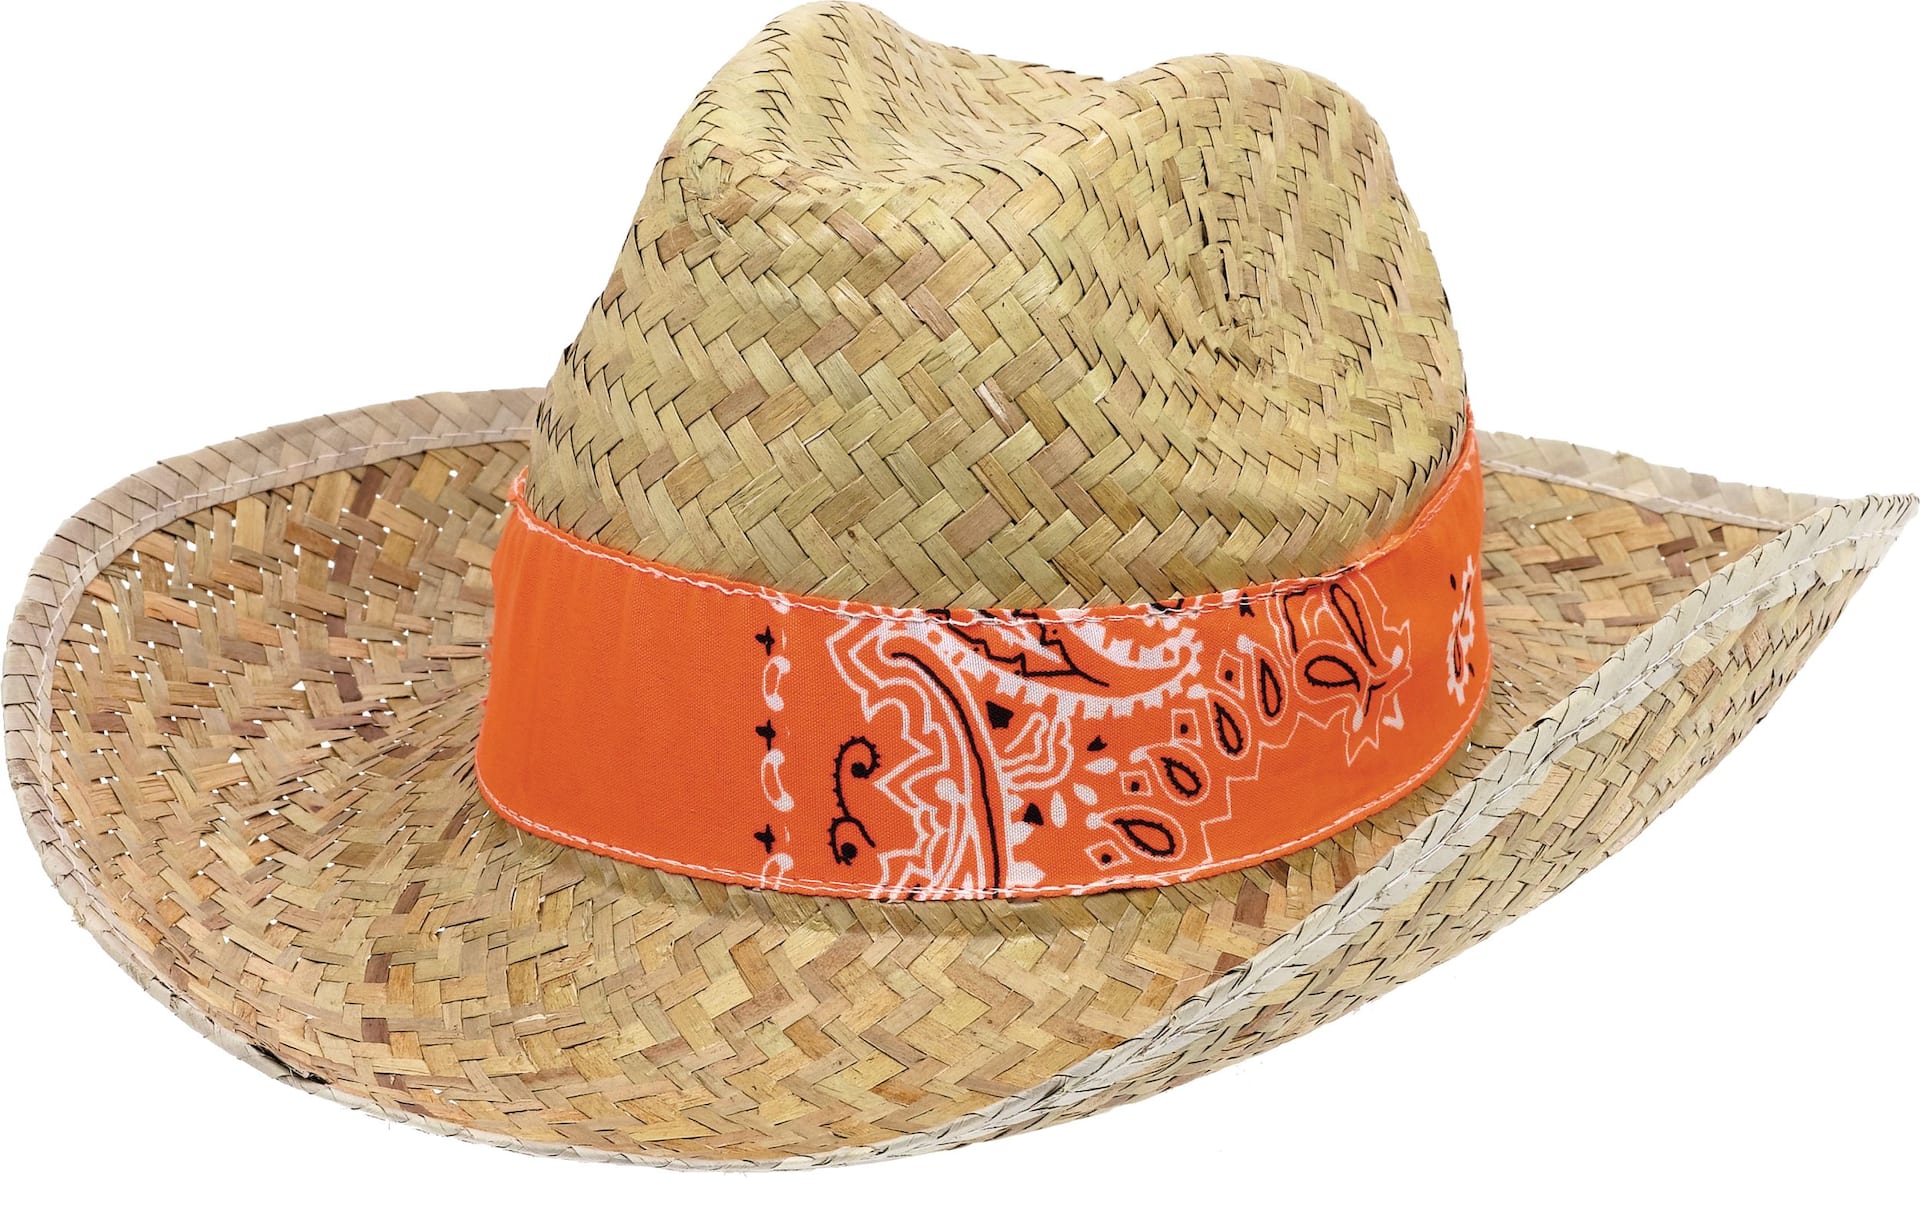 https://media-www.canadiantire.ca/product/seasonal-gardening/party-city-everyday/party-city-party-supplies-decor/8428460/straw-hat-bandana-band-e65b1473-4231-4eb2-9495-103cf47b3a83-jpgrendition.jpg